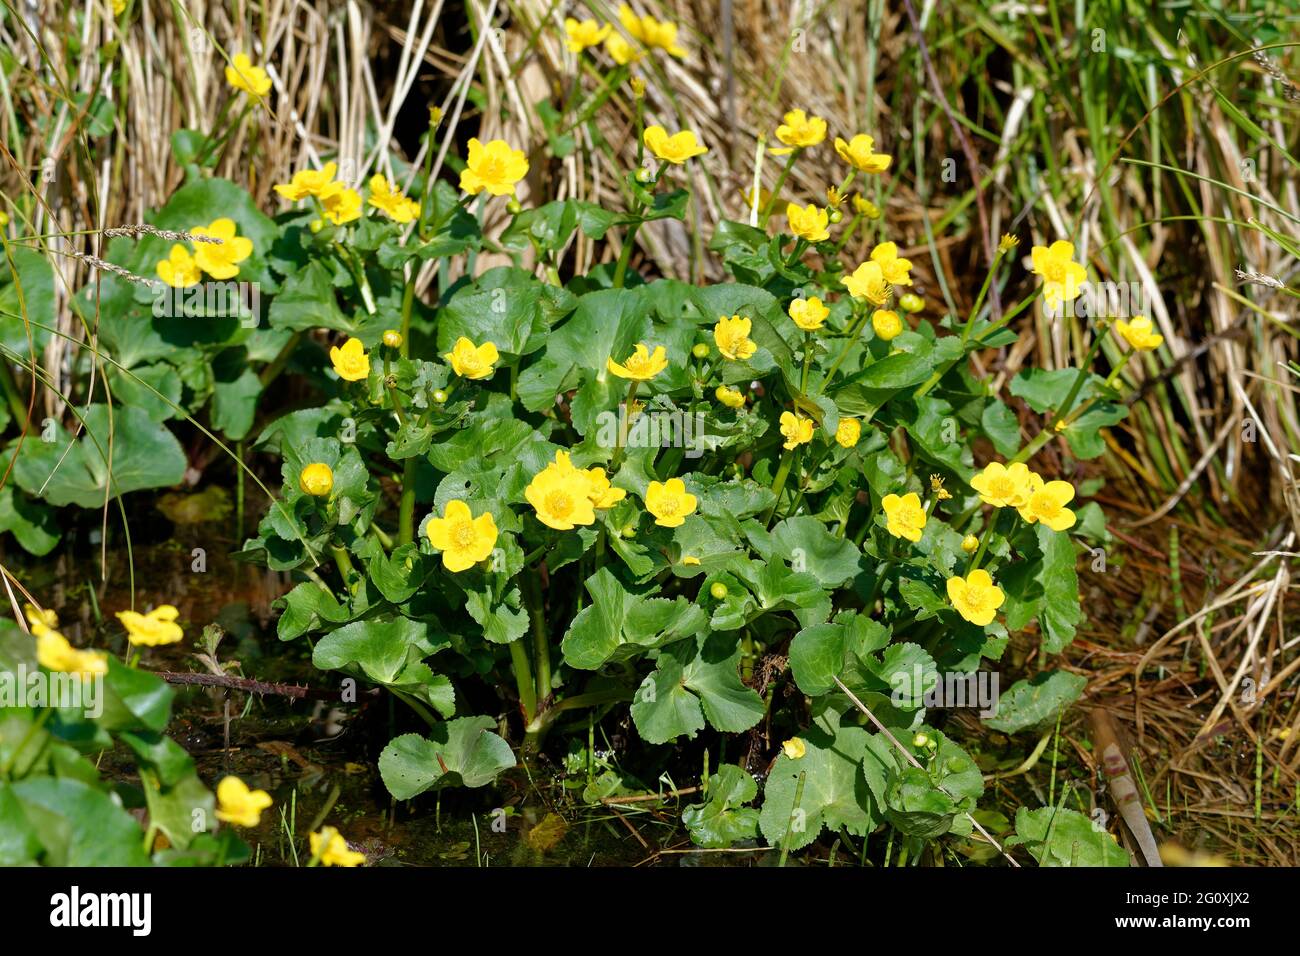 Marsh Marigold or Kingcup - Caltha palustris whole plant in marsh Stock Photo